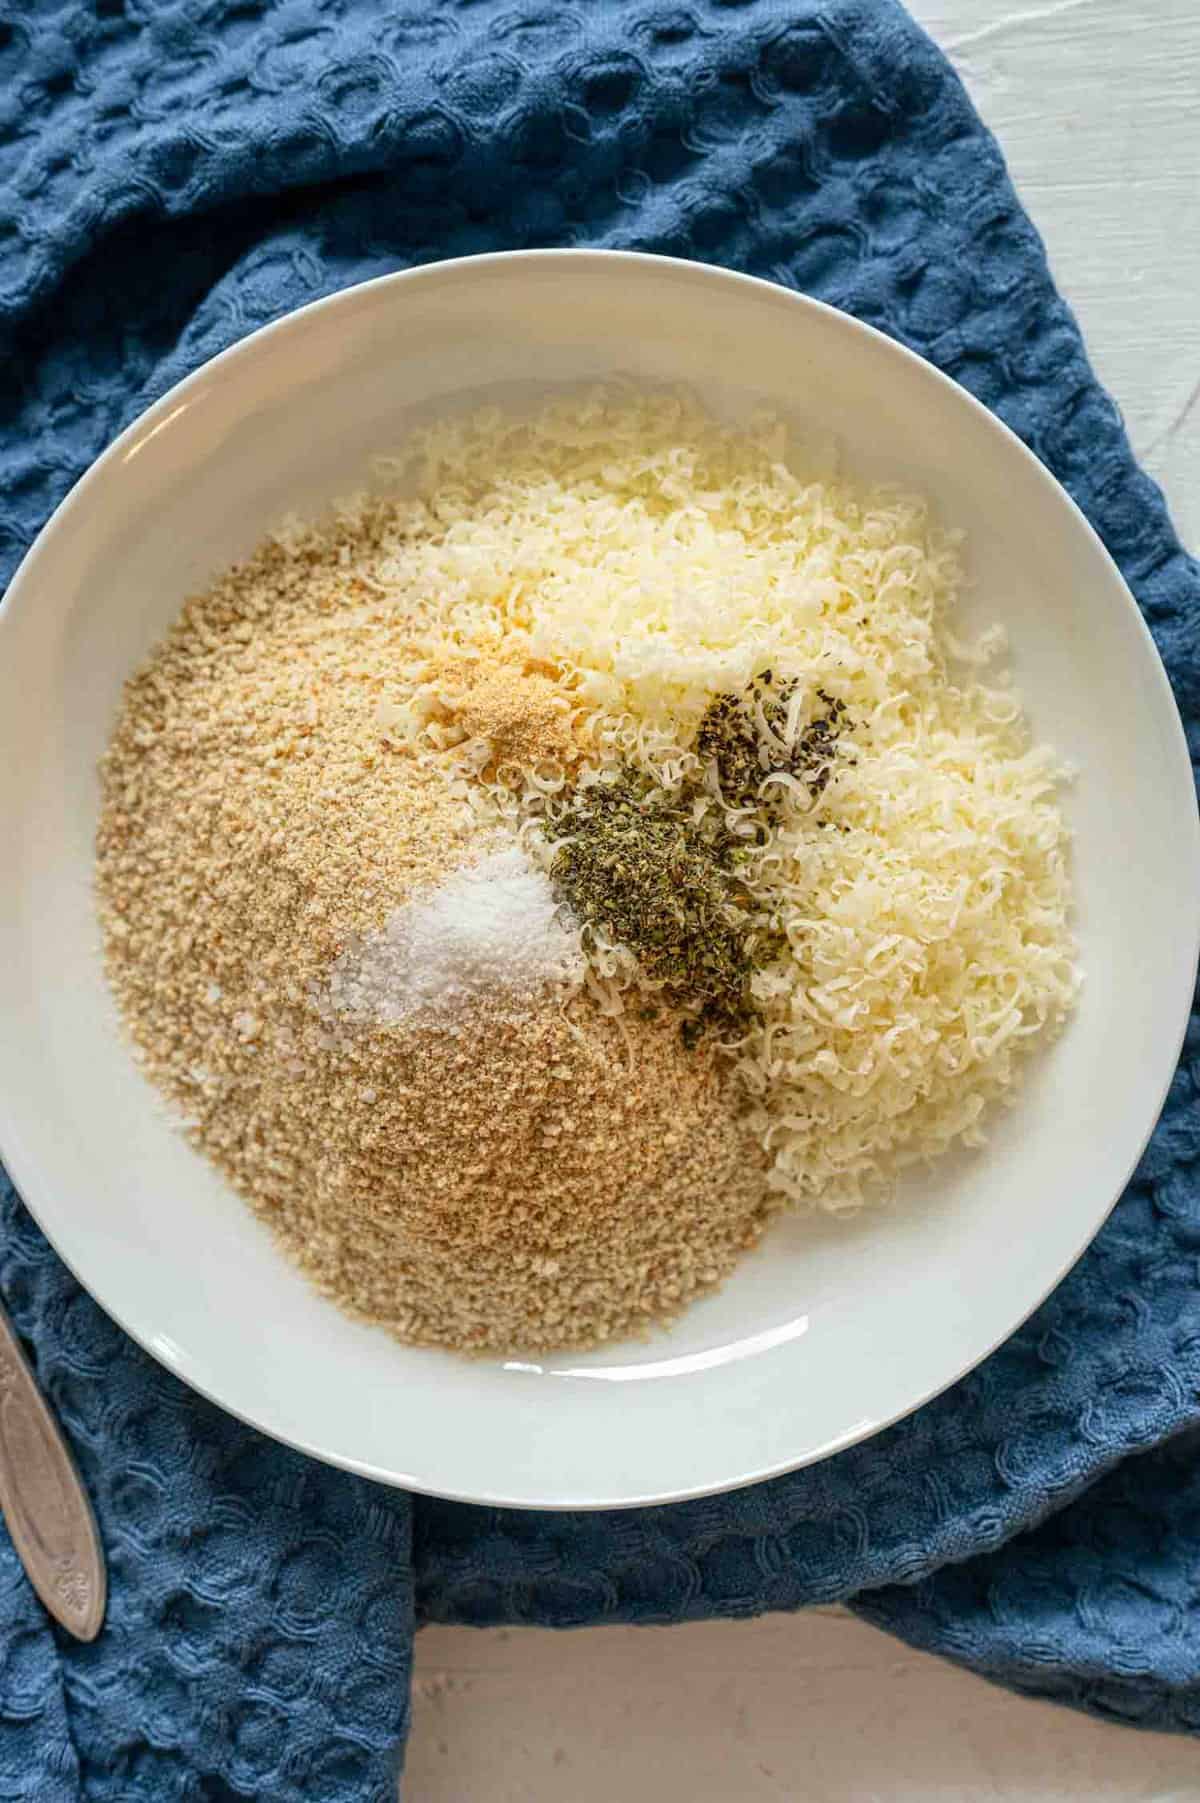 Bread crumbs, seasonings, and grated parmesan cheese in bowl for breading chicken breasts.